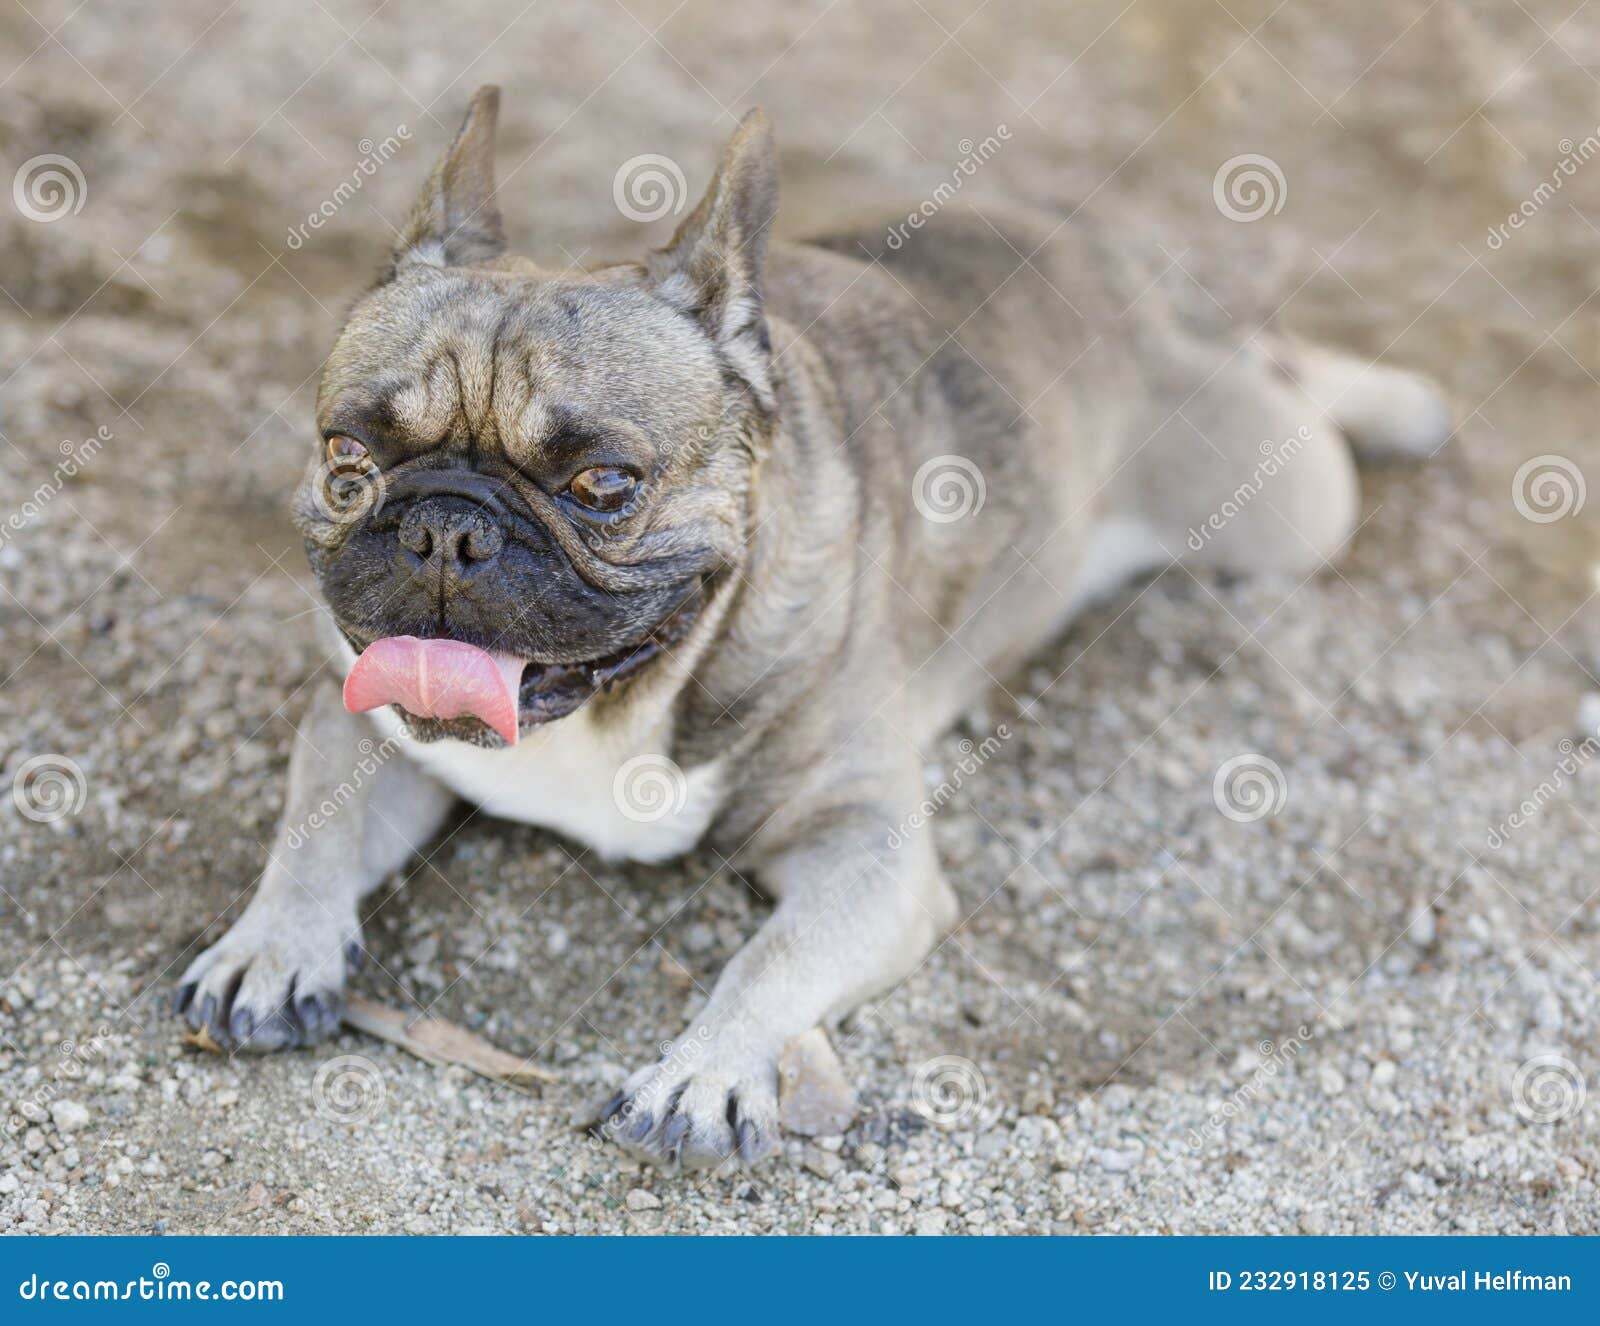 6-year-old sable male frenchie resting with tongue sticking out